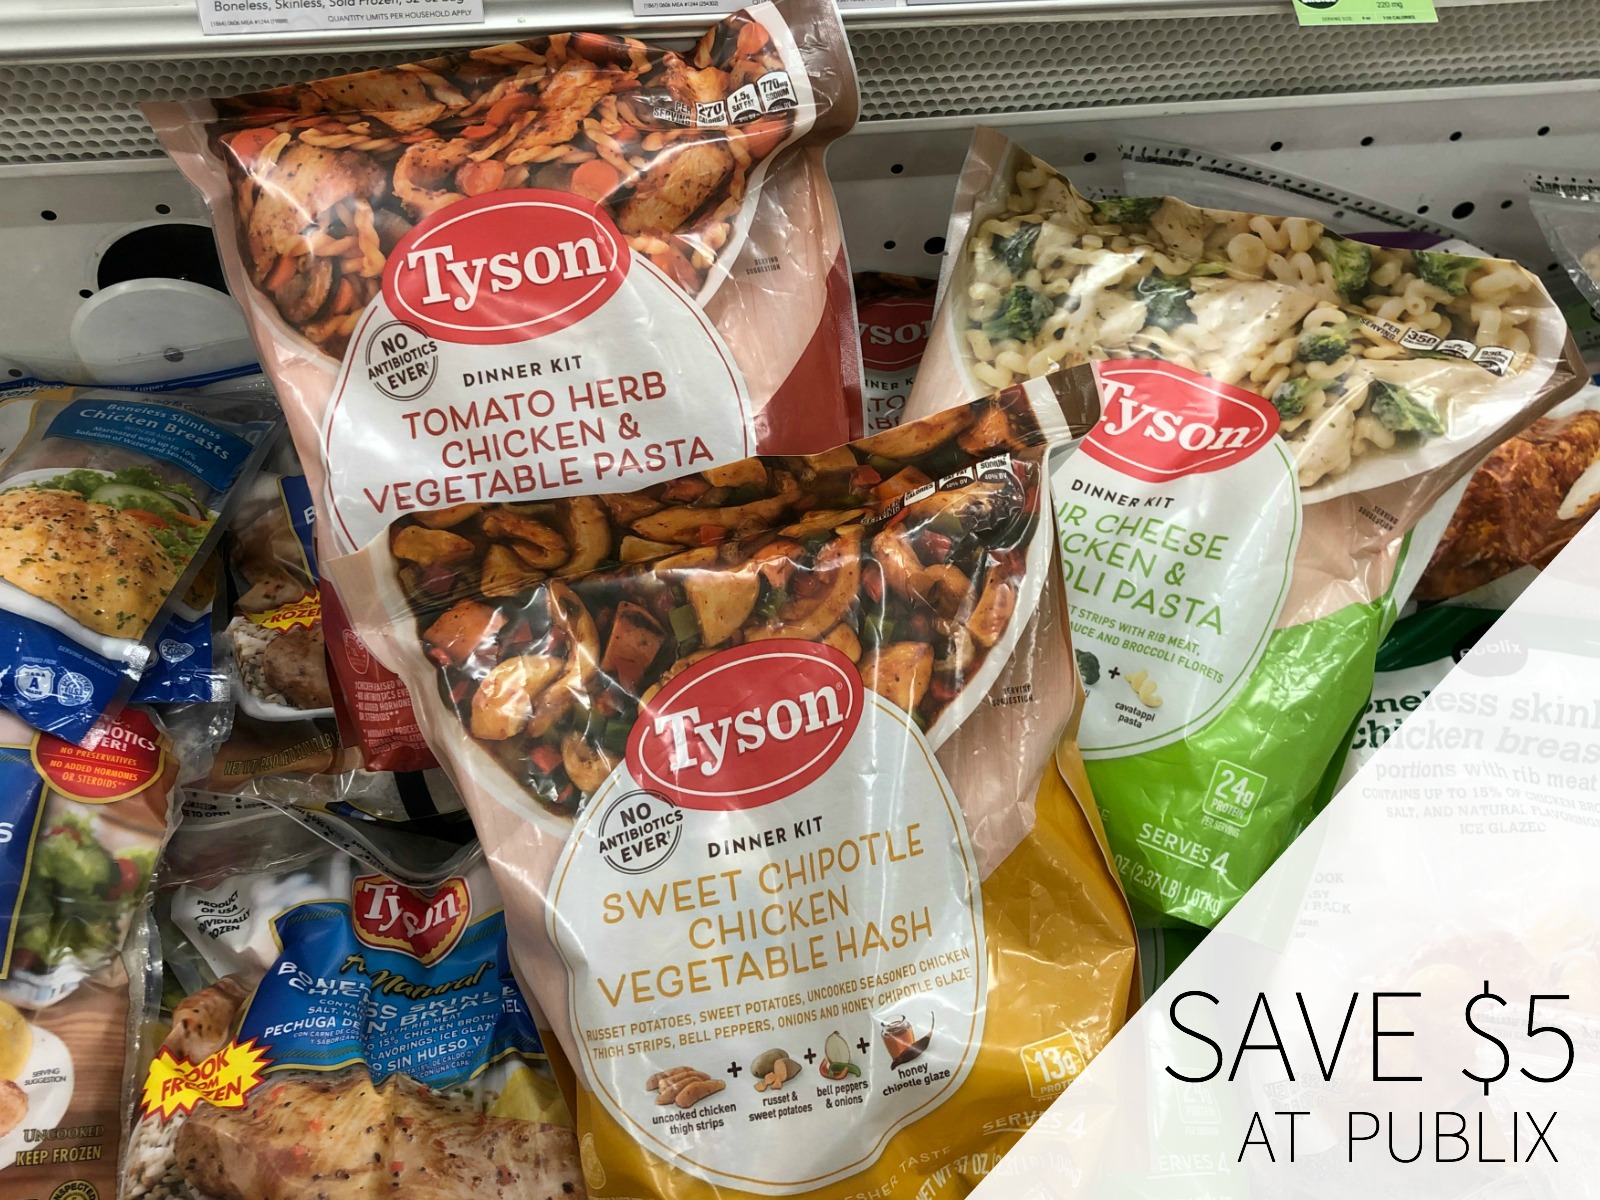 Save $5 Off Any Tyson Dinner Kit With The Coupon Combo At Publix on I Heart Publix